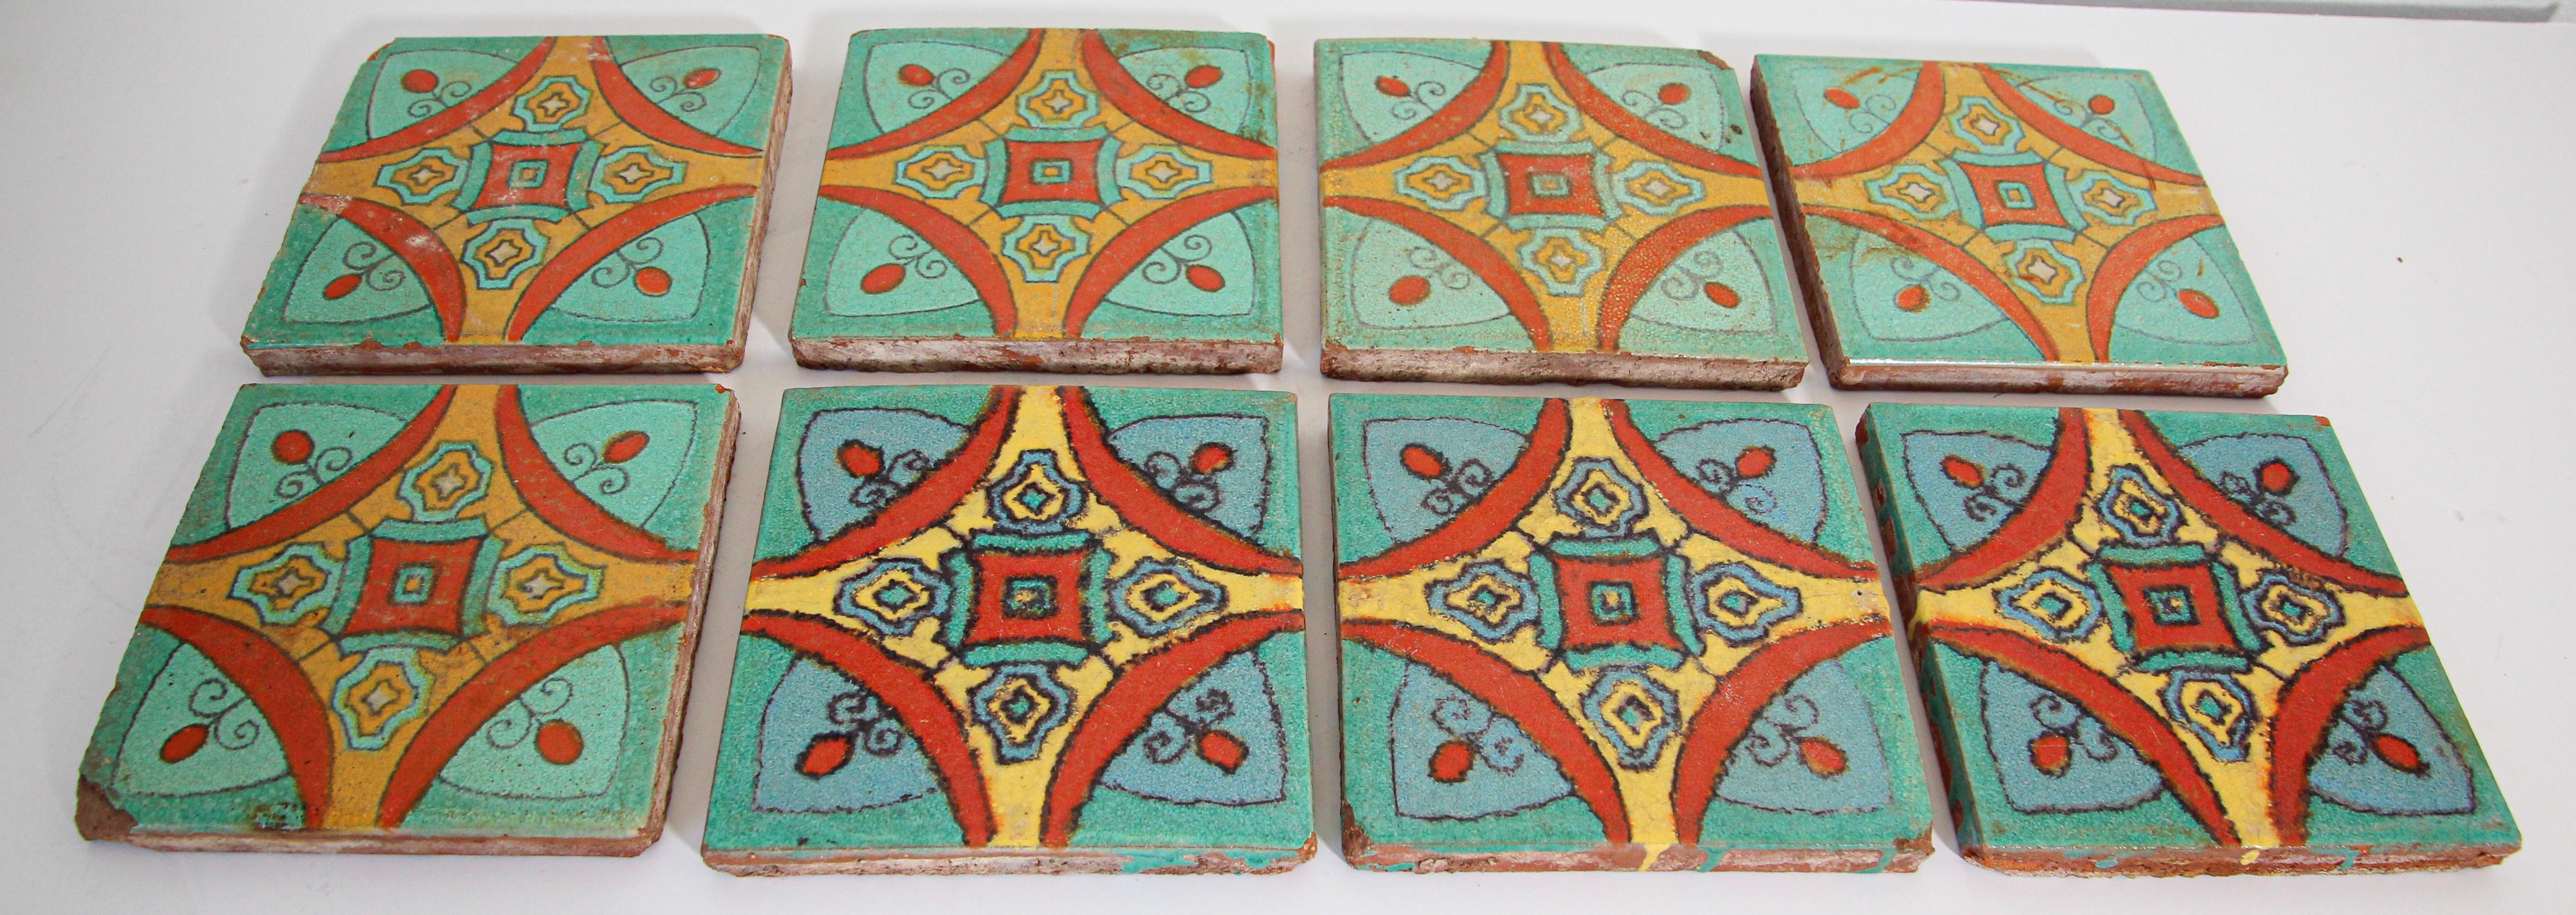 Talavera Handcrafted Spanish Wall Tiles Set of 8 For Sale 10